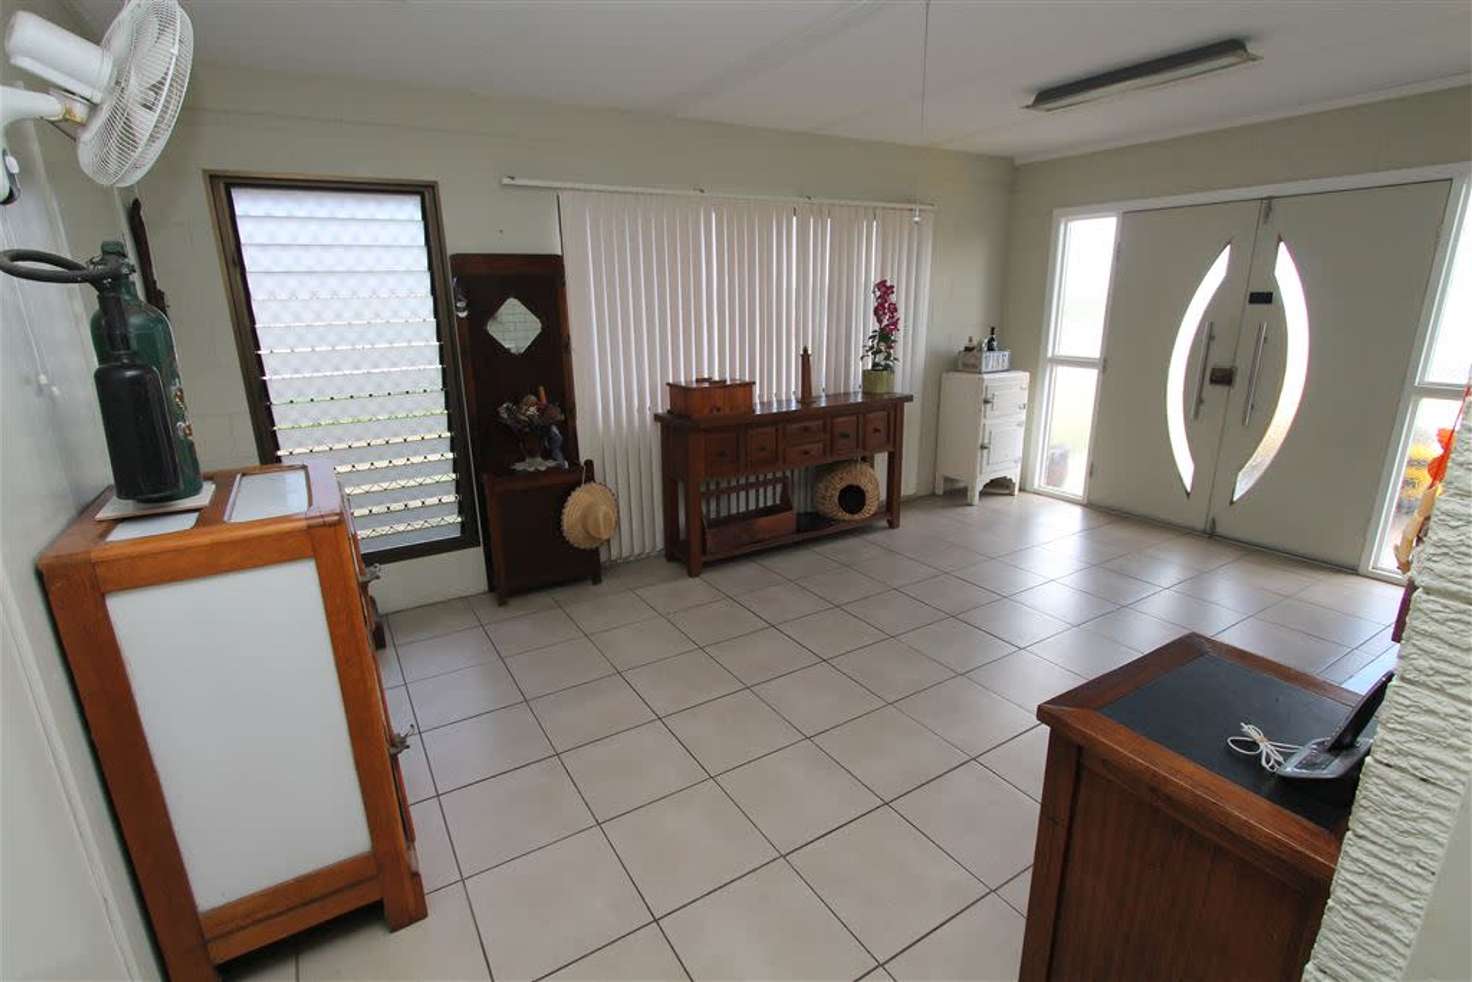 Main view of Homely house listing, 53 - 55 Old Clare Road, Ayr QLD 4807